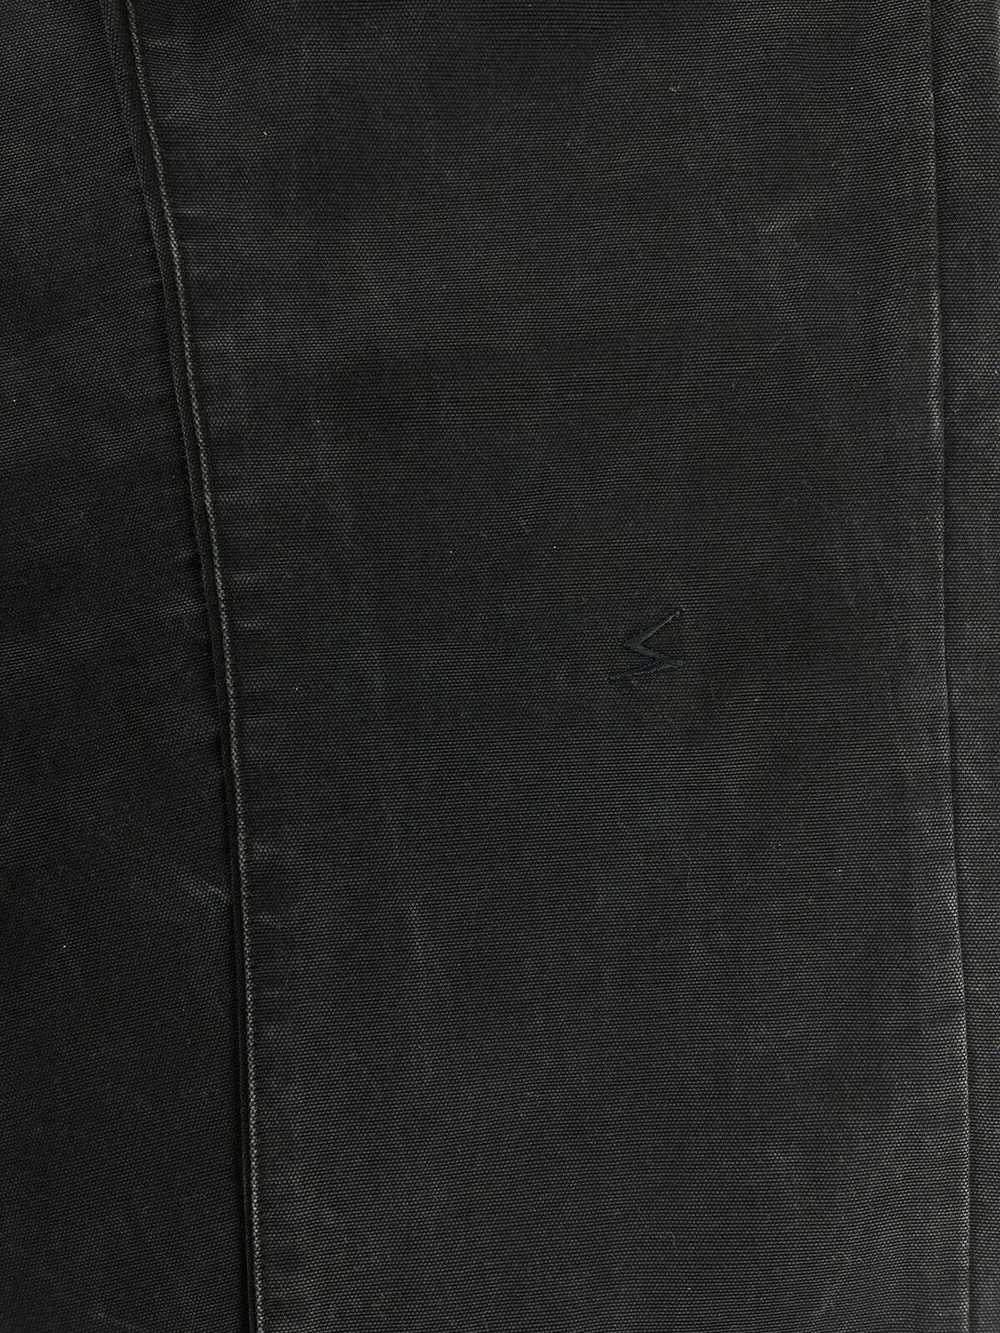 Undercover AW06 Undercover Waist Bag Cargo Pants … - image 6